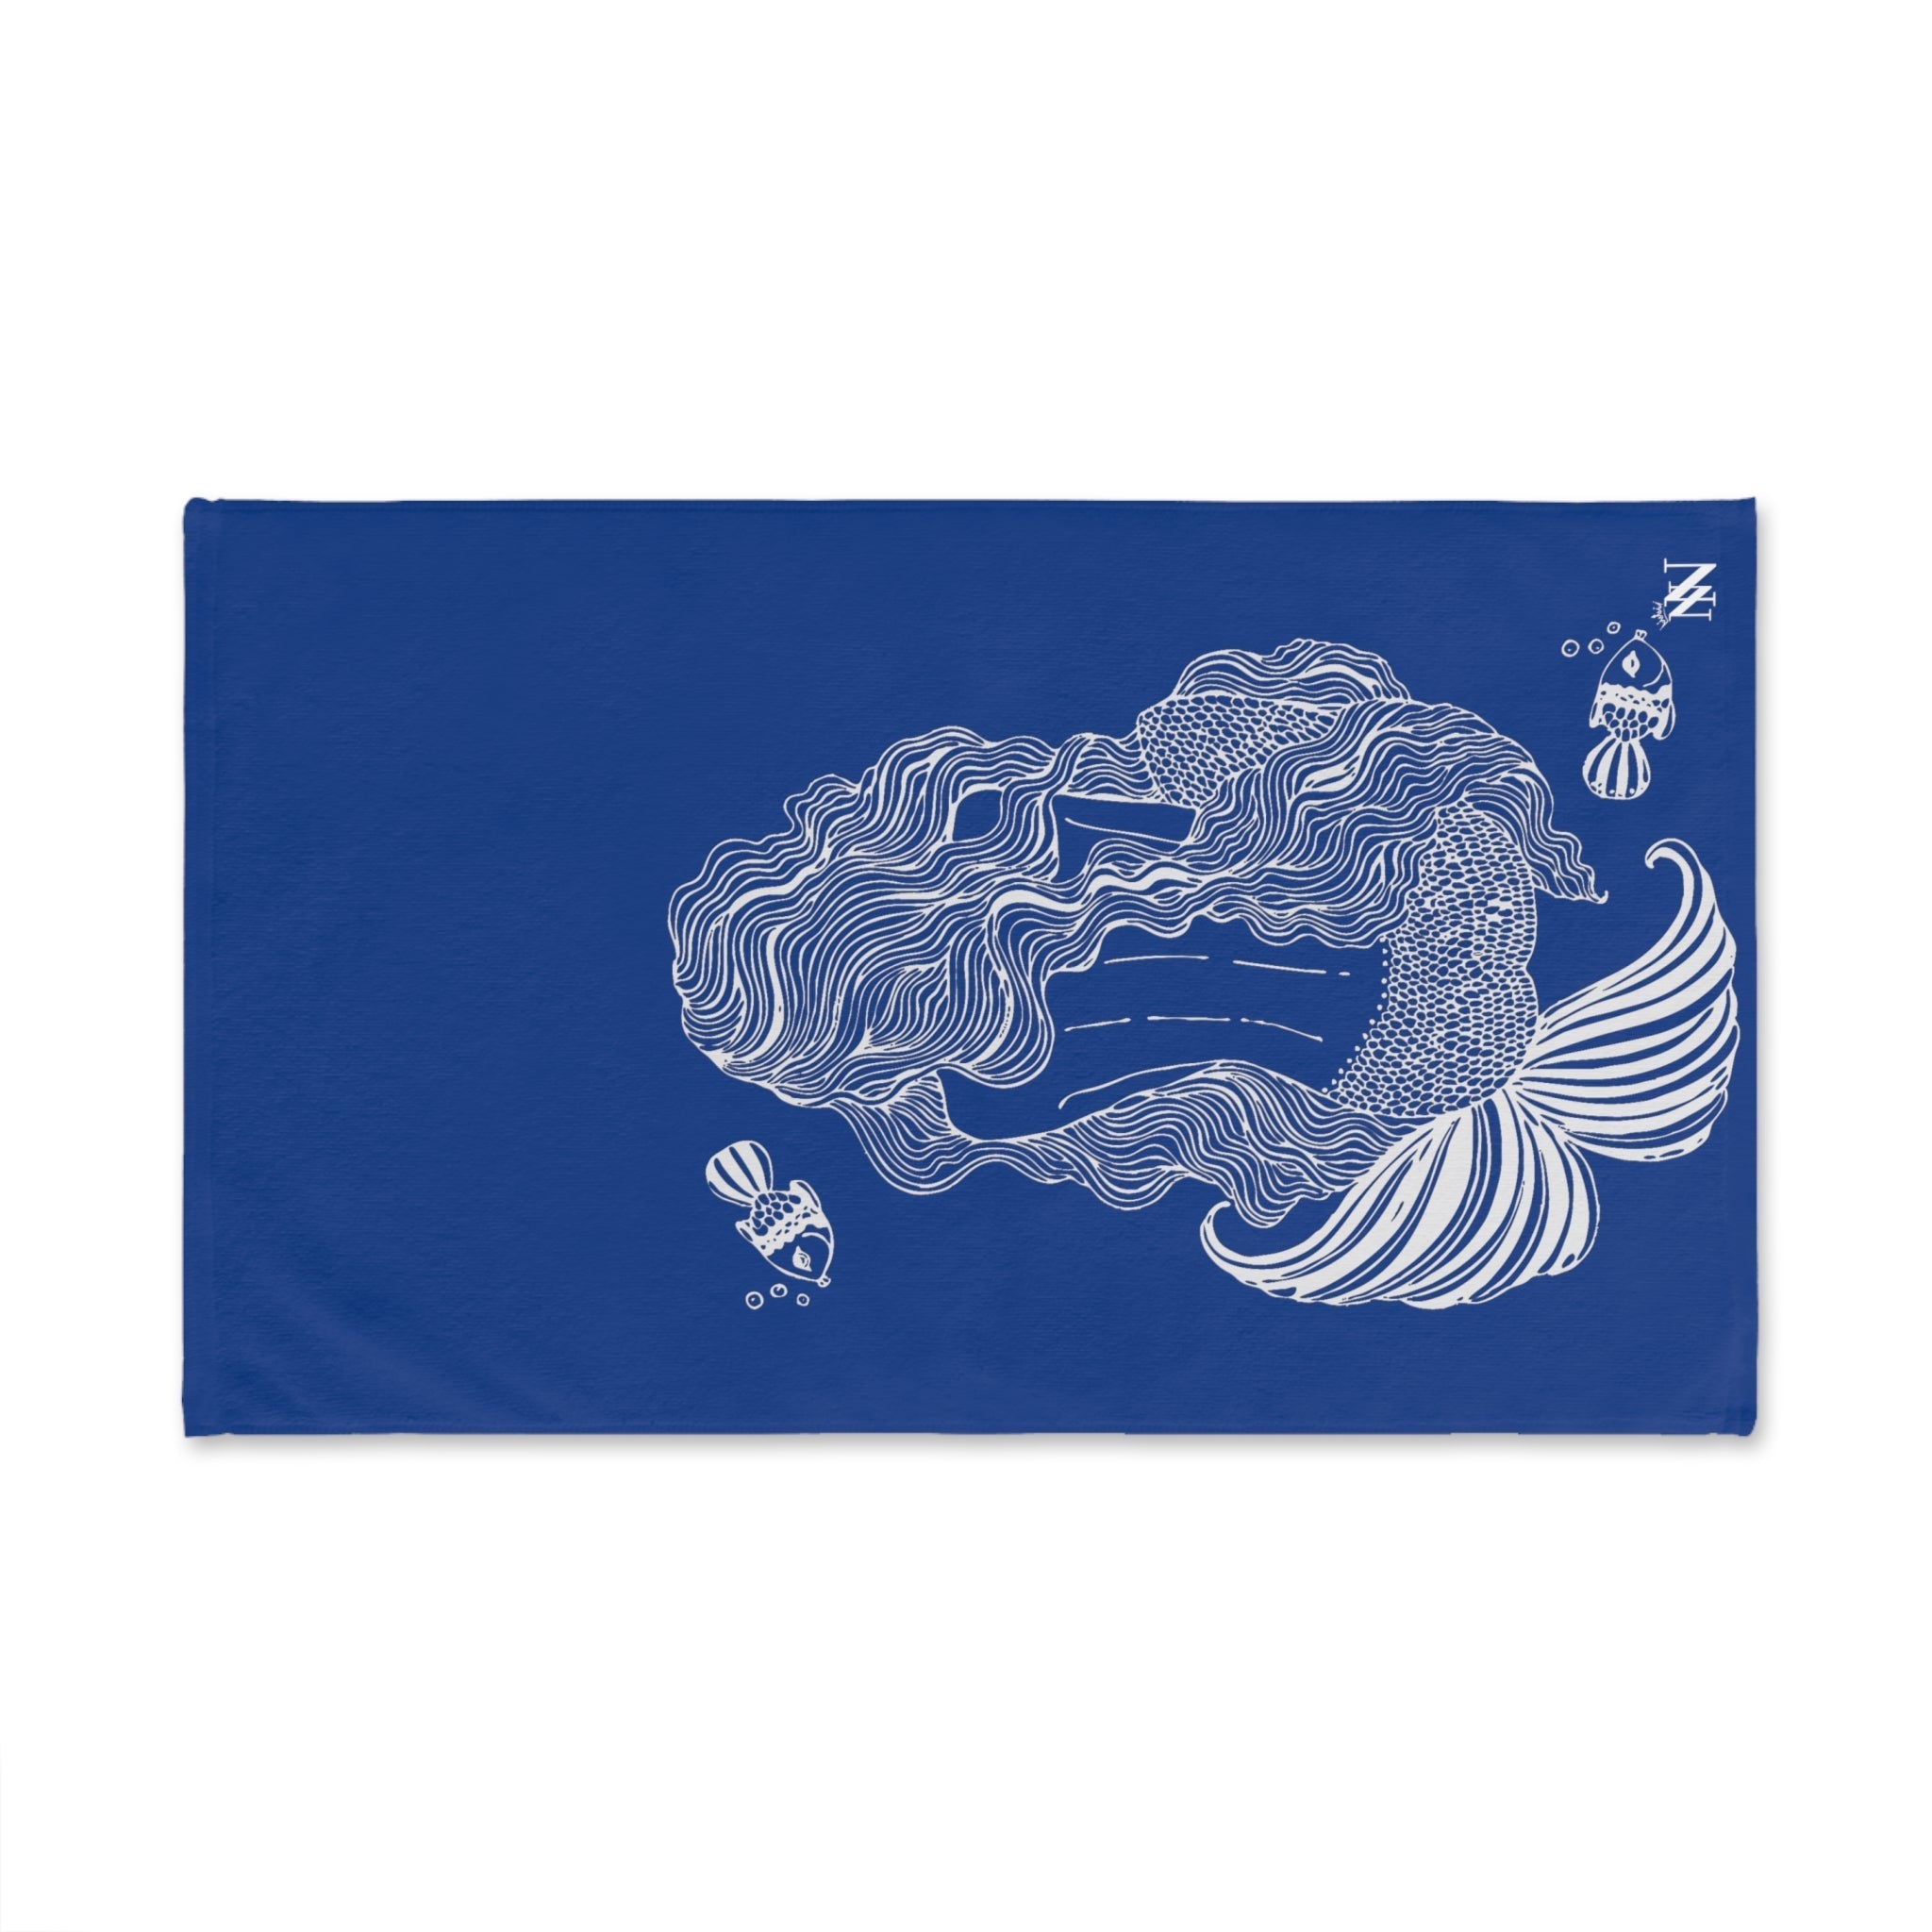 Back Mermaid SeaBlue | Gifts for Boyfriend, Funny Towel Romantic Gift for Wedding Couple Fiance First Year Anniversary Valentines, Party Gag Gifts, Joke Humor Cloth for Husband Men BF NECTAR NAPKINS